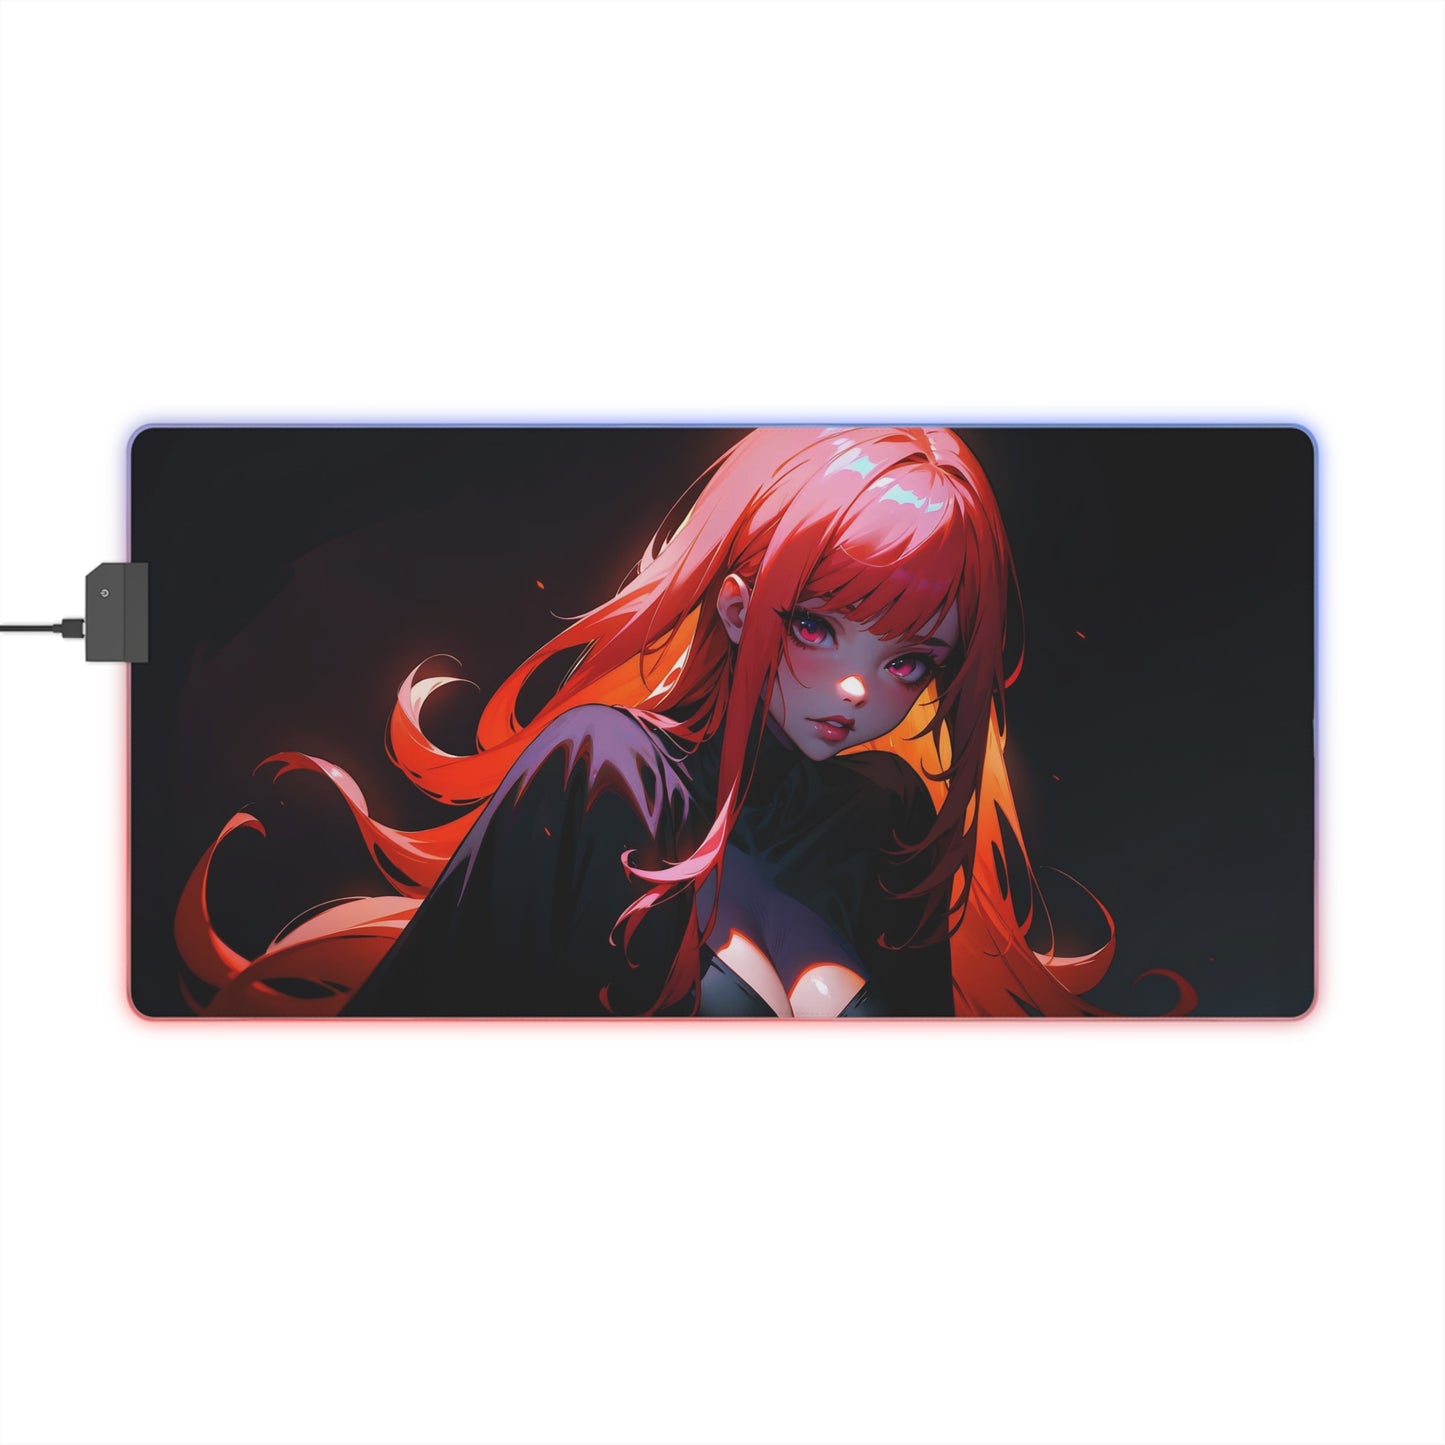 AG-18 LED Gaming Mouse Pad